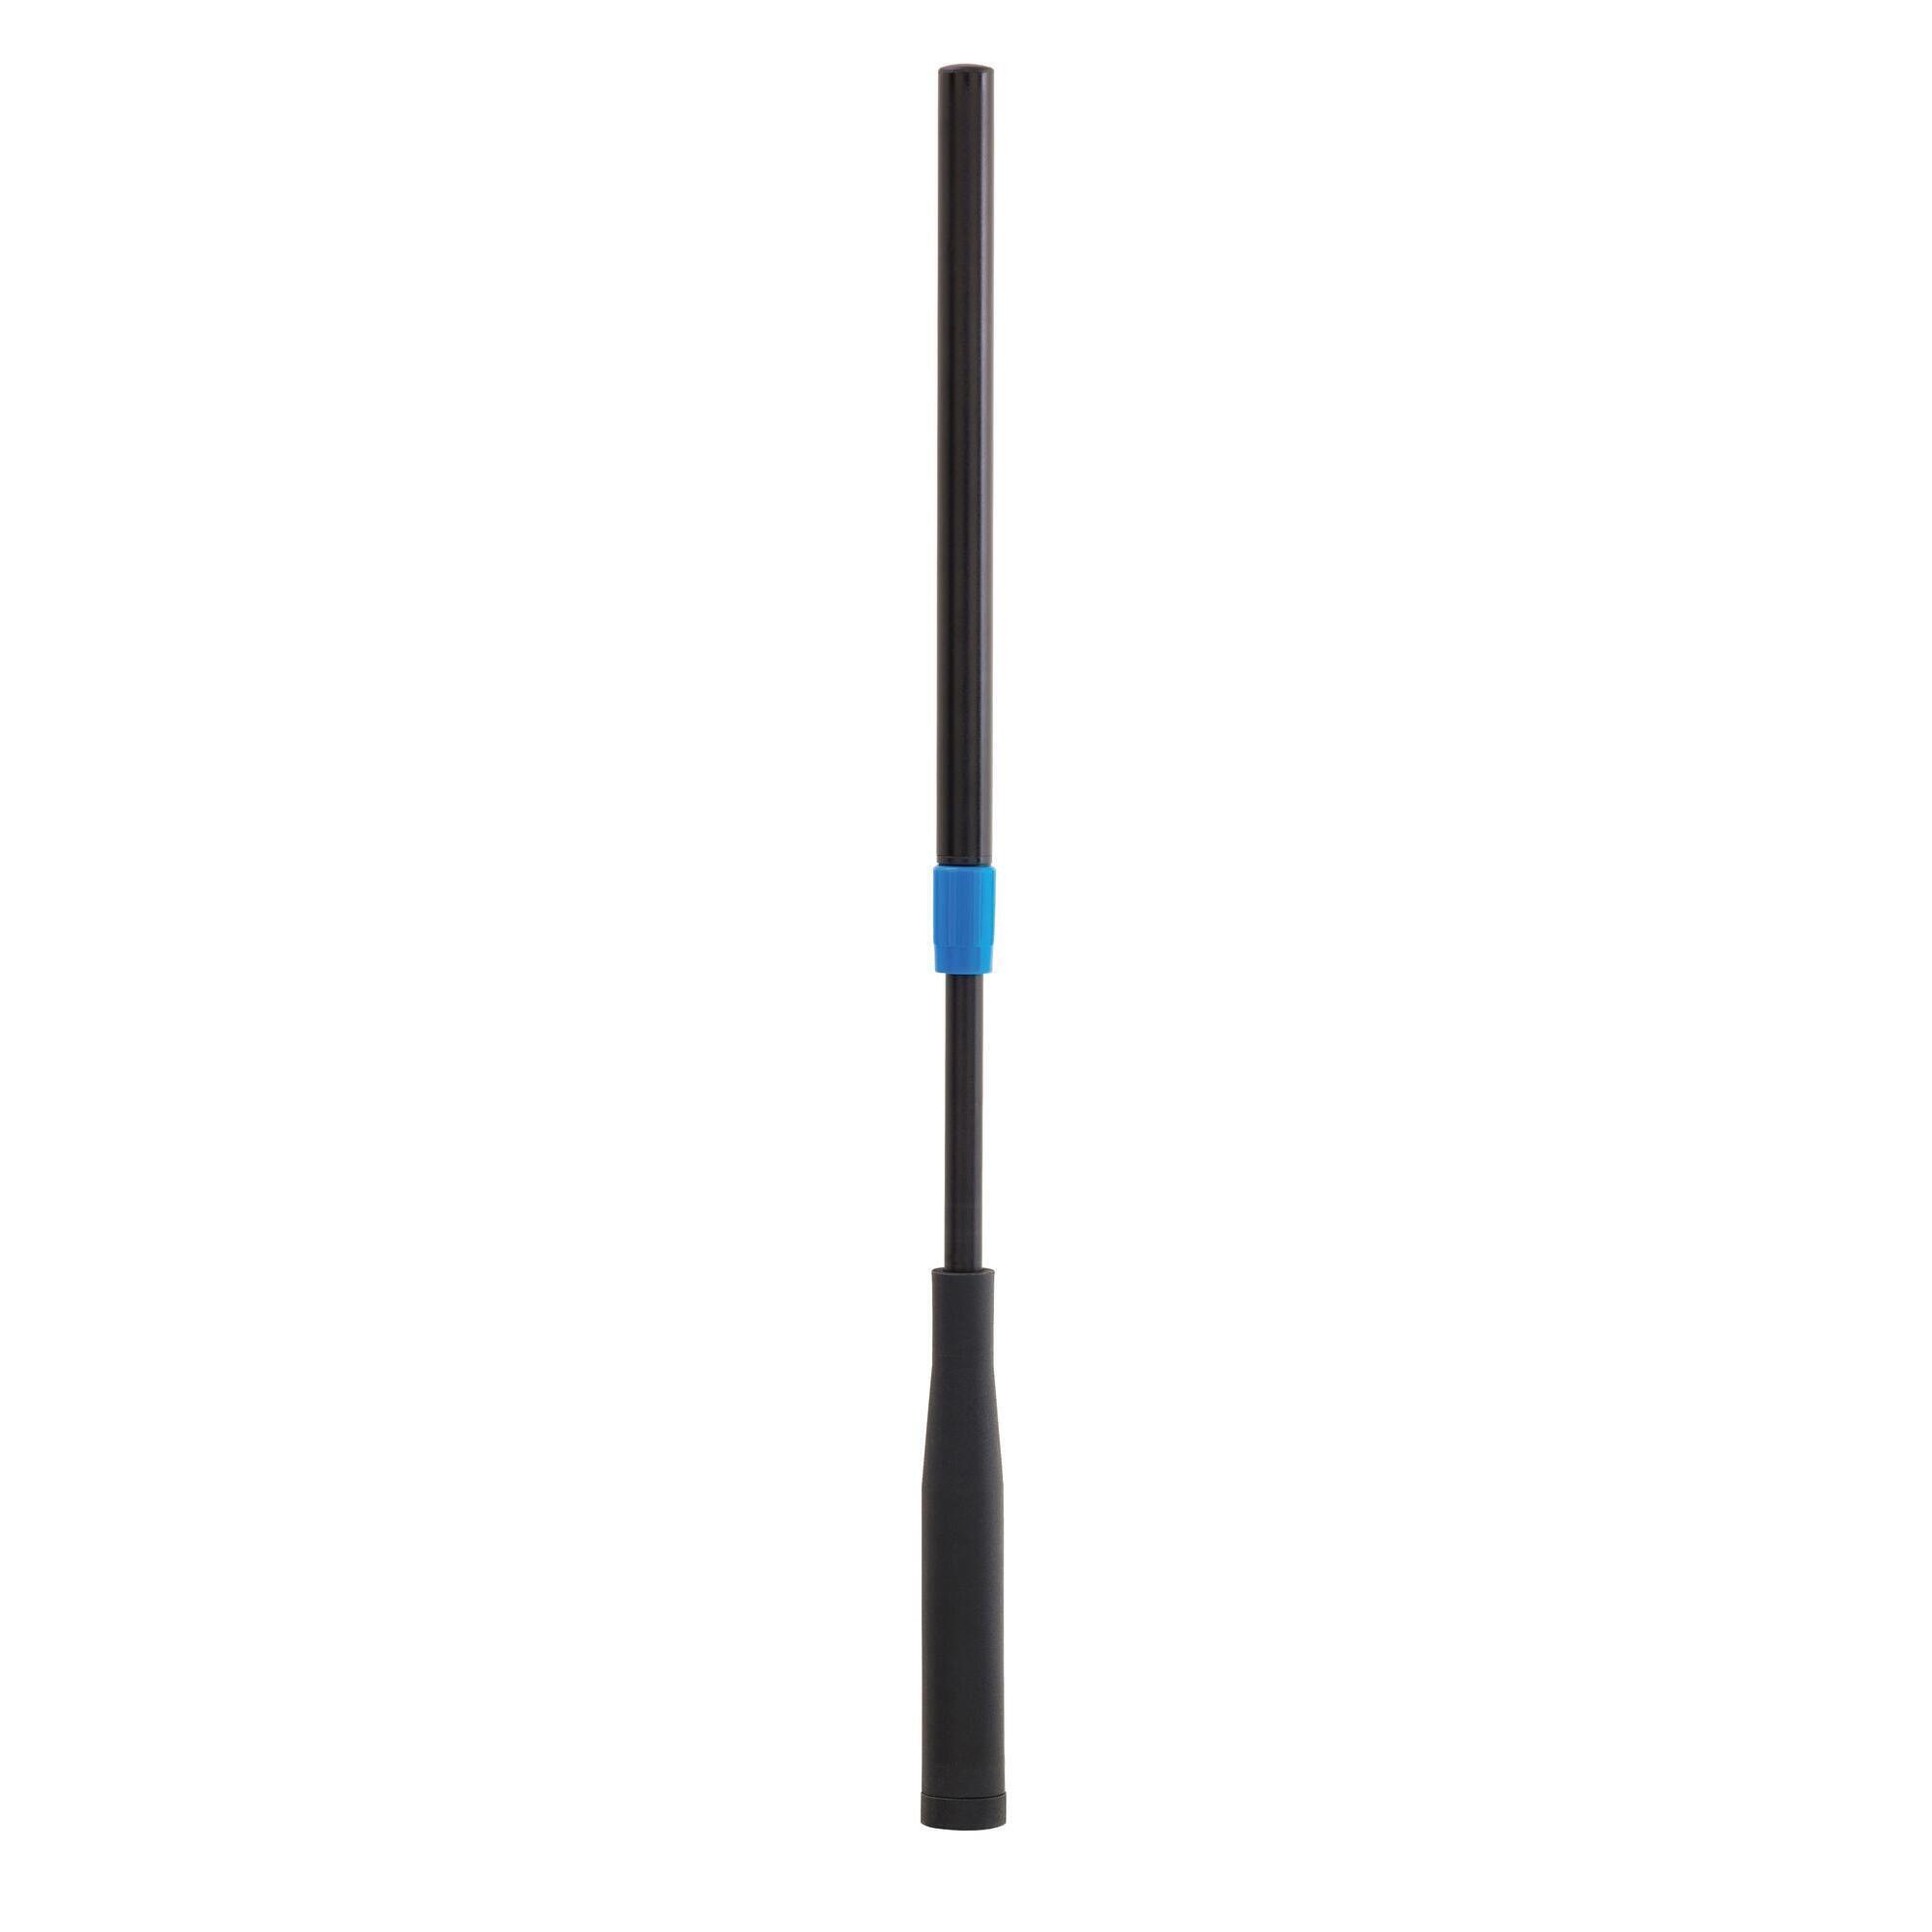 POWERGLIDE POWERGLIDE PUSH ON TELESCOPIC EXTENSION 18 - 30 INCH